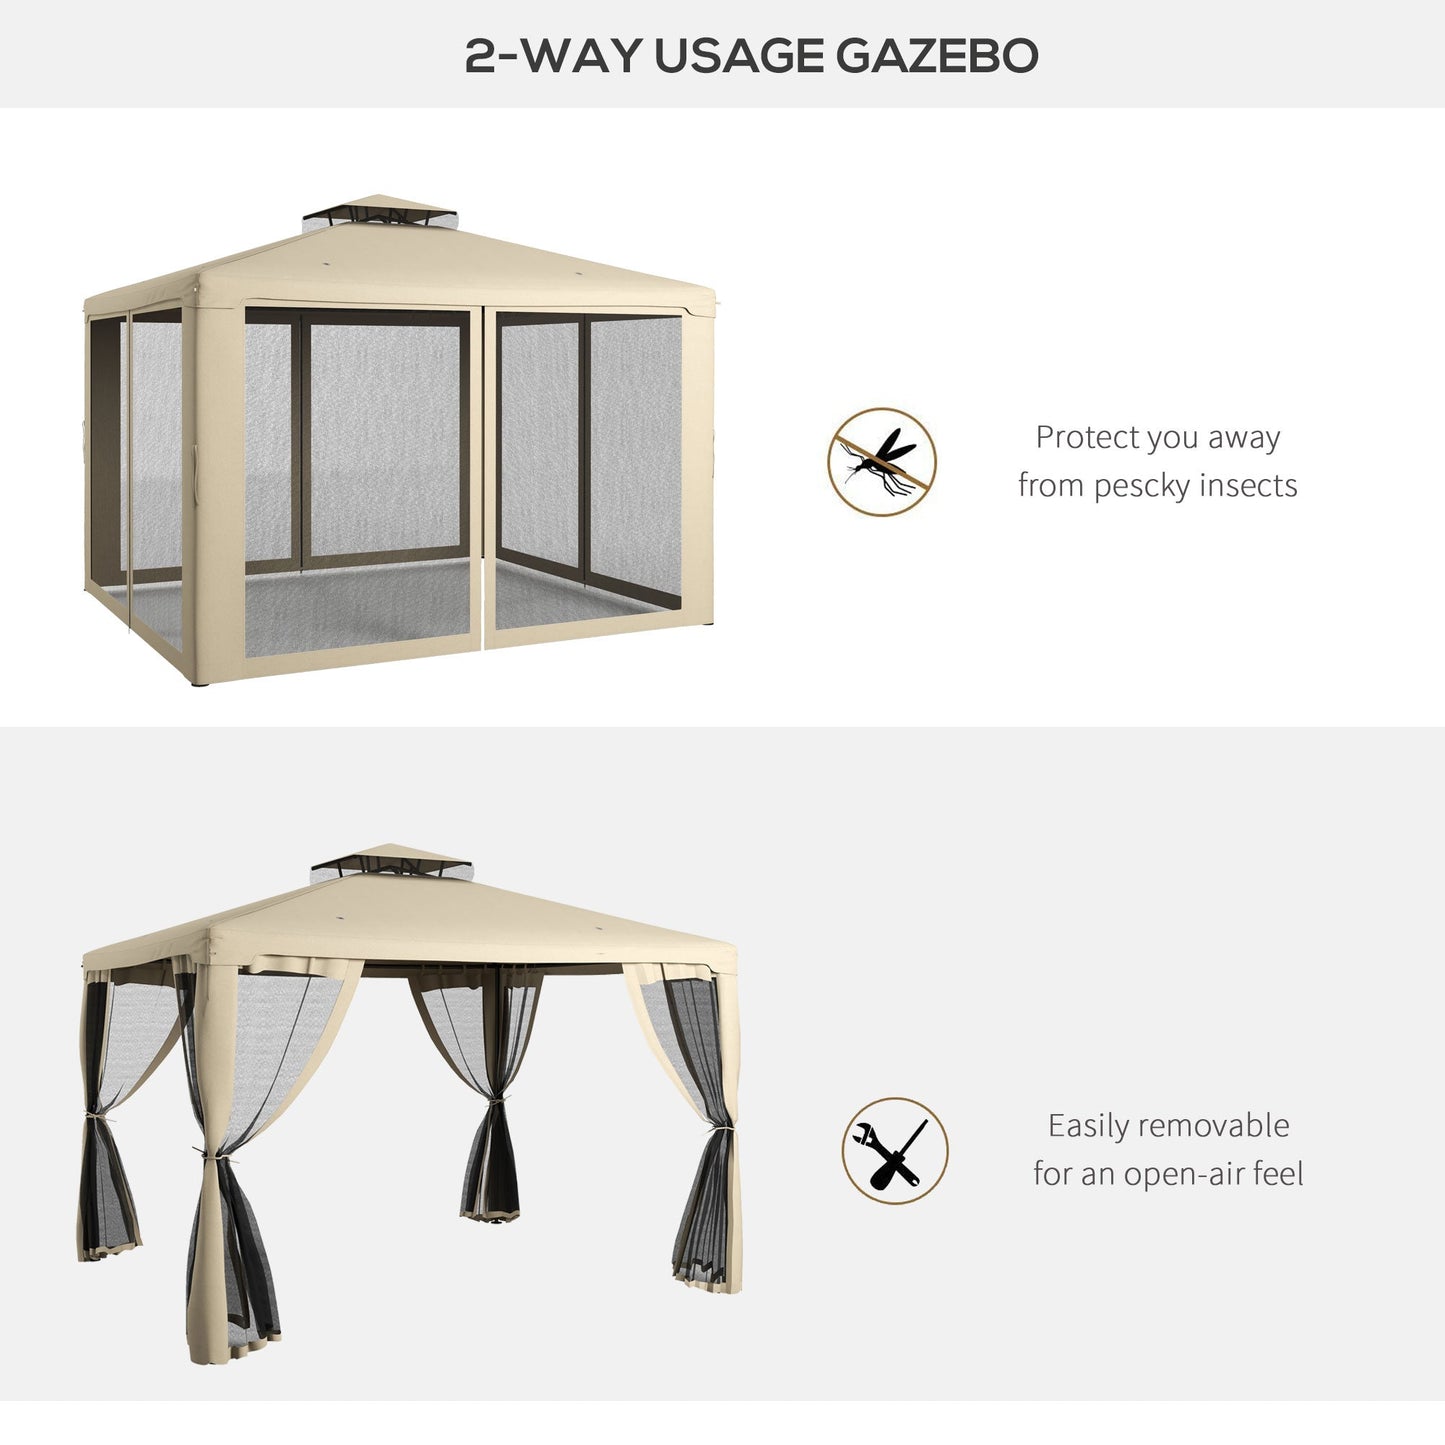 -Outsunny 10' x 12' Patio Gazebo Outdoor Canopy Shelter with 2-Tier Roof and Netting, Steel Frame for Garden, Taupe - Outdoor Style Company